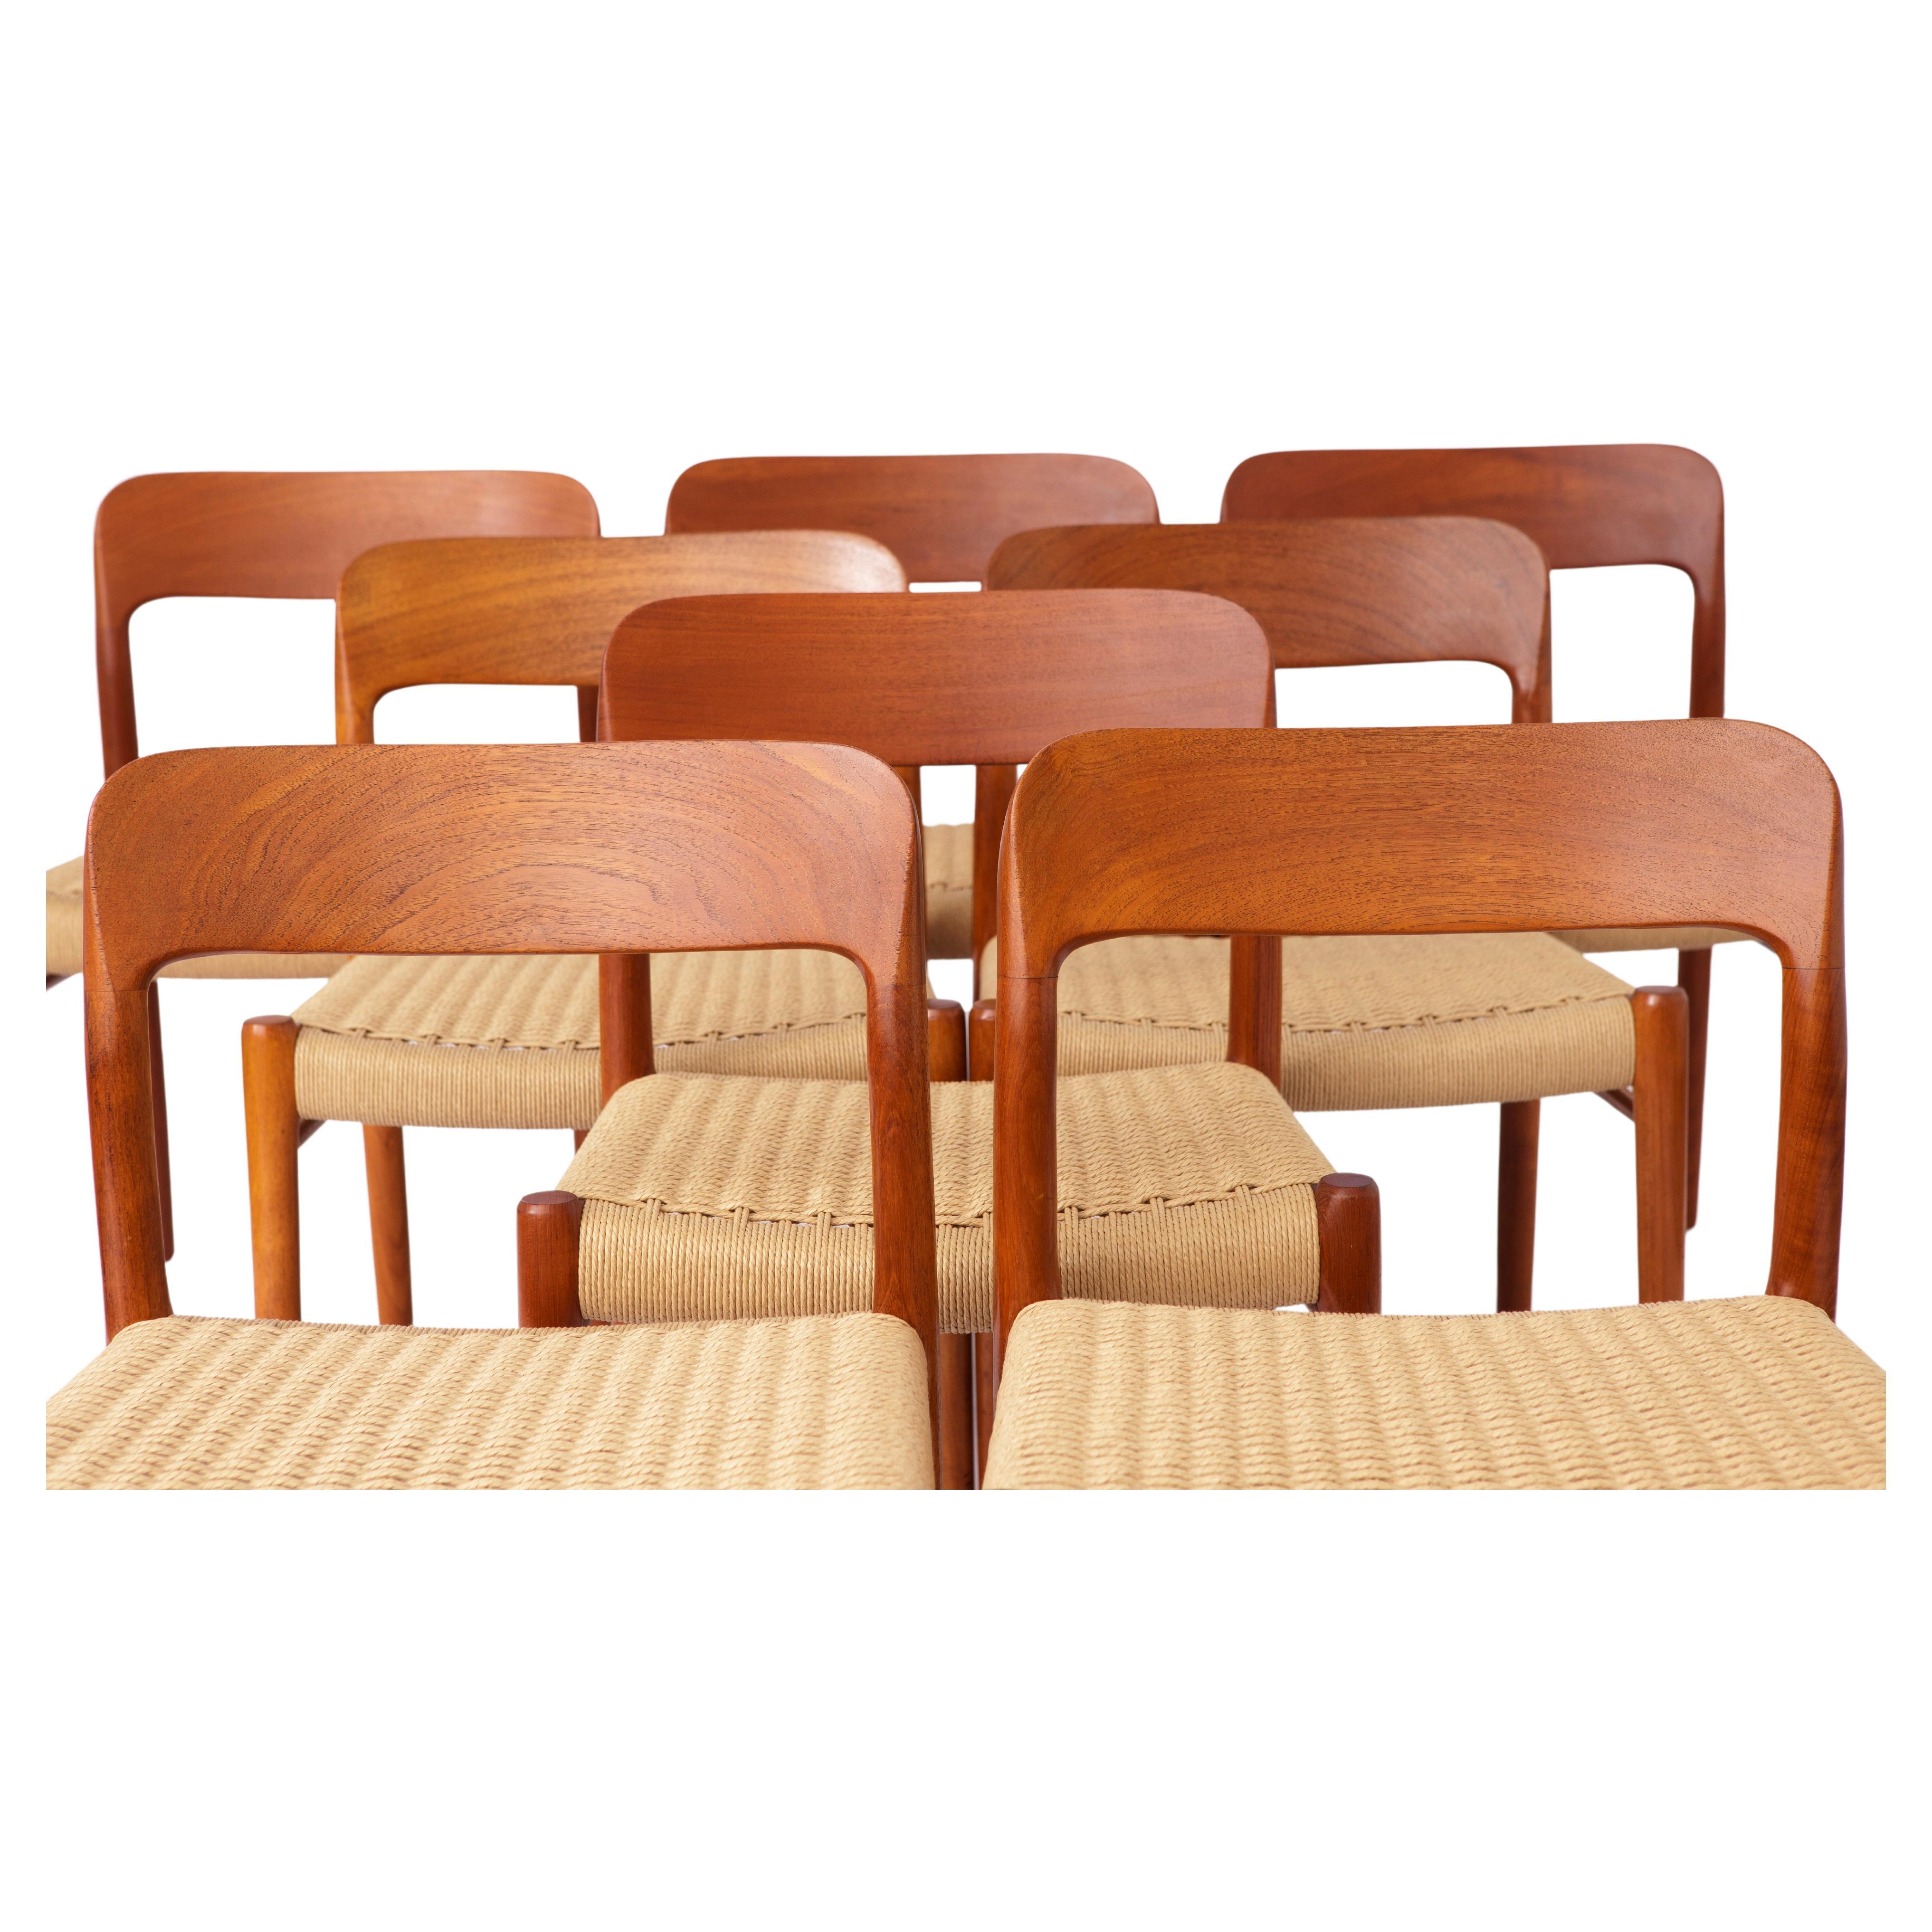 8 Niels Moller teak dining chairs with papercord seats by Niels Moller, model 75